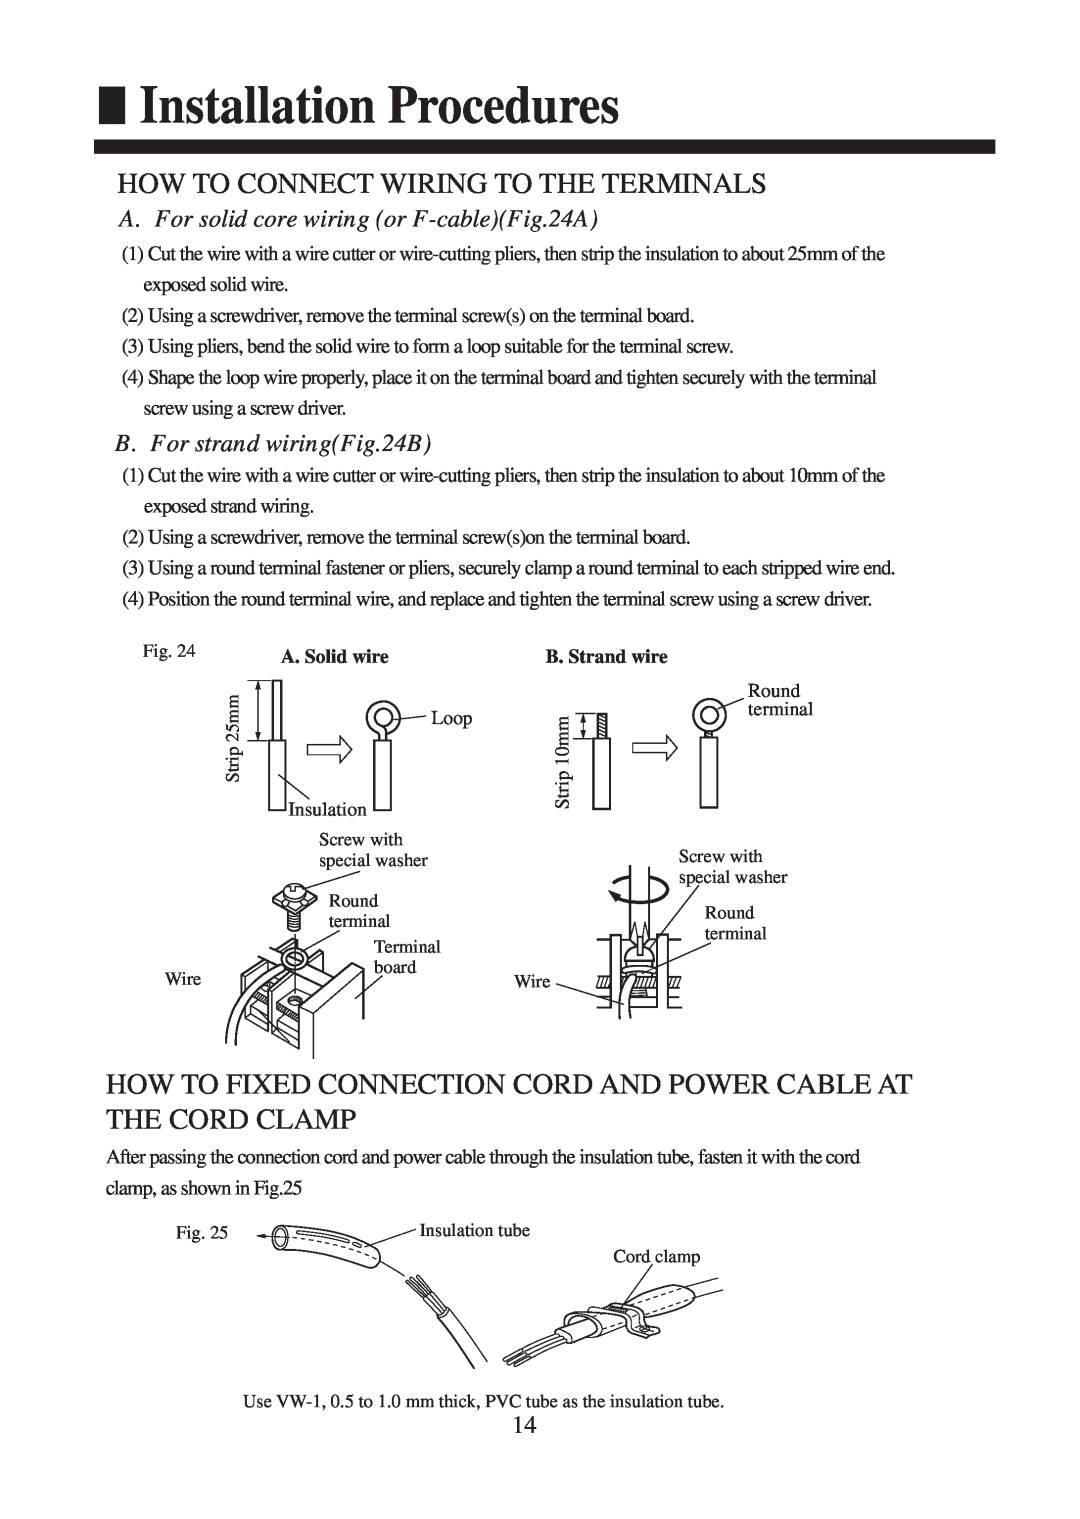 Haier AC182XCERA How To Connect Wiring To The Terminals, A.For solid core wiring or F-cableFig.24A, B. Strand wire 